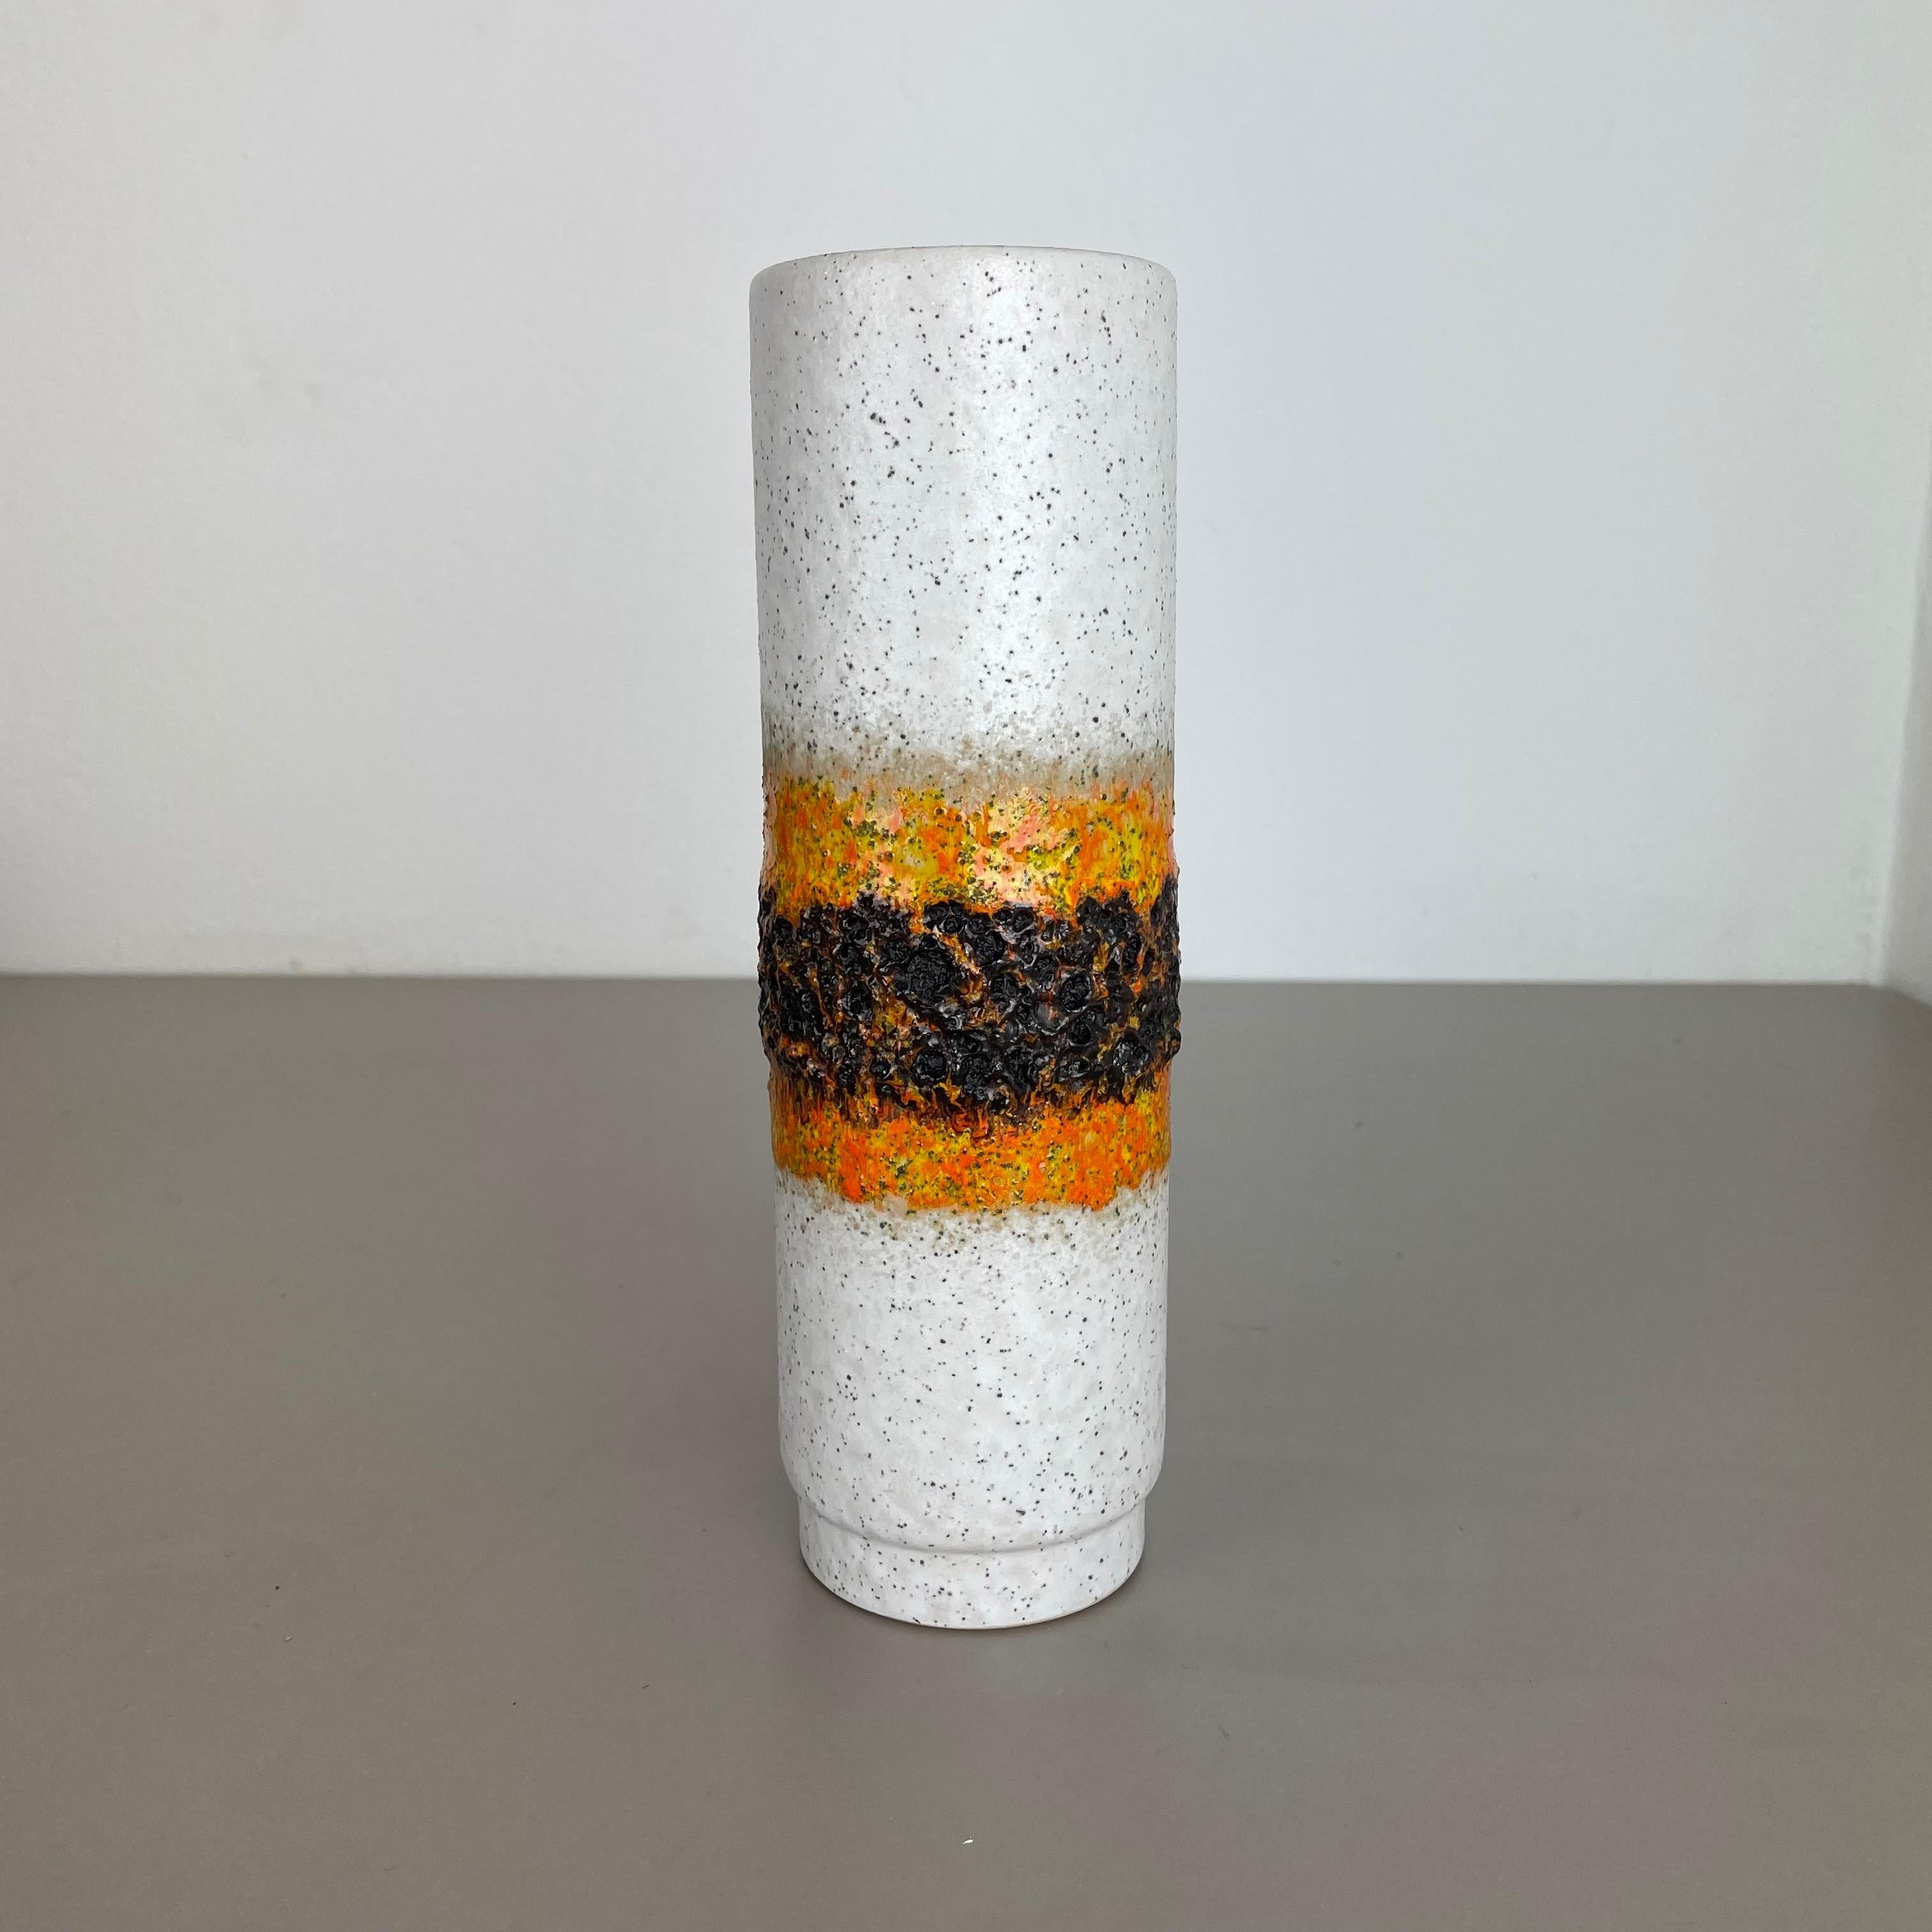 Article:

fat lava art vase




Producer:

Jopeko Ceramics, Germany



Decade:

1970s




These original vintage vase was produced in the 1970s in Germany. It is made of ceramic pottery in fat lava optic. Super rare in this